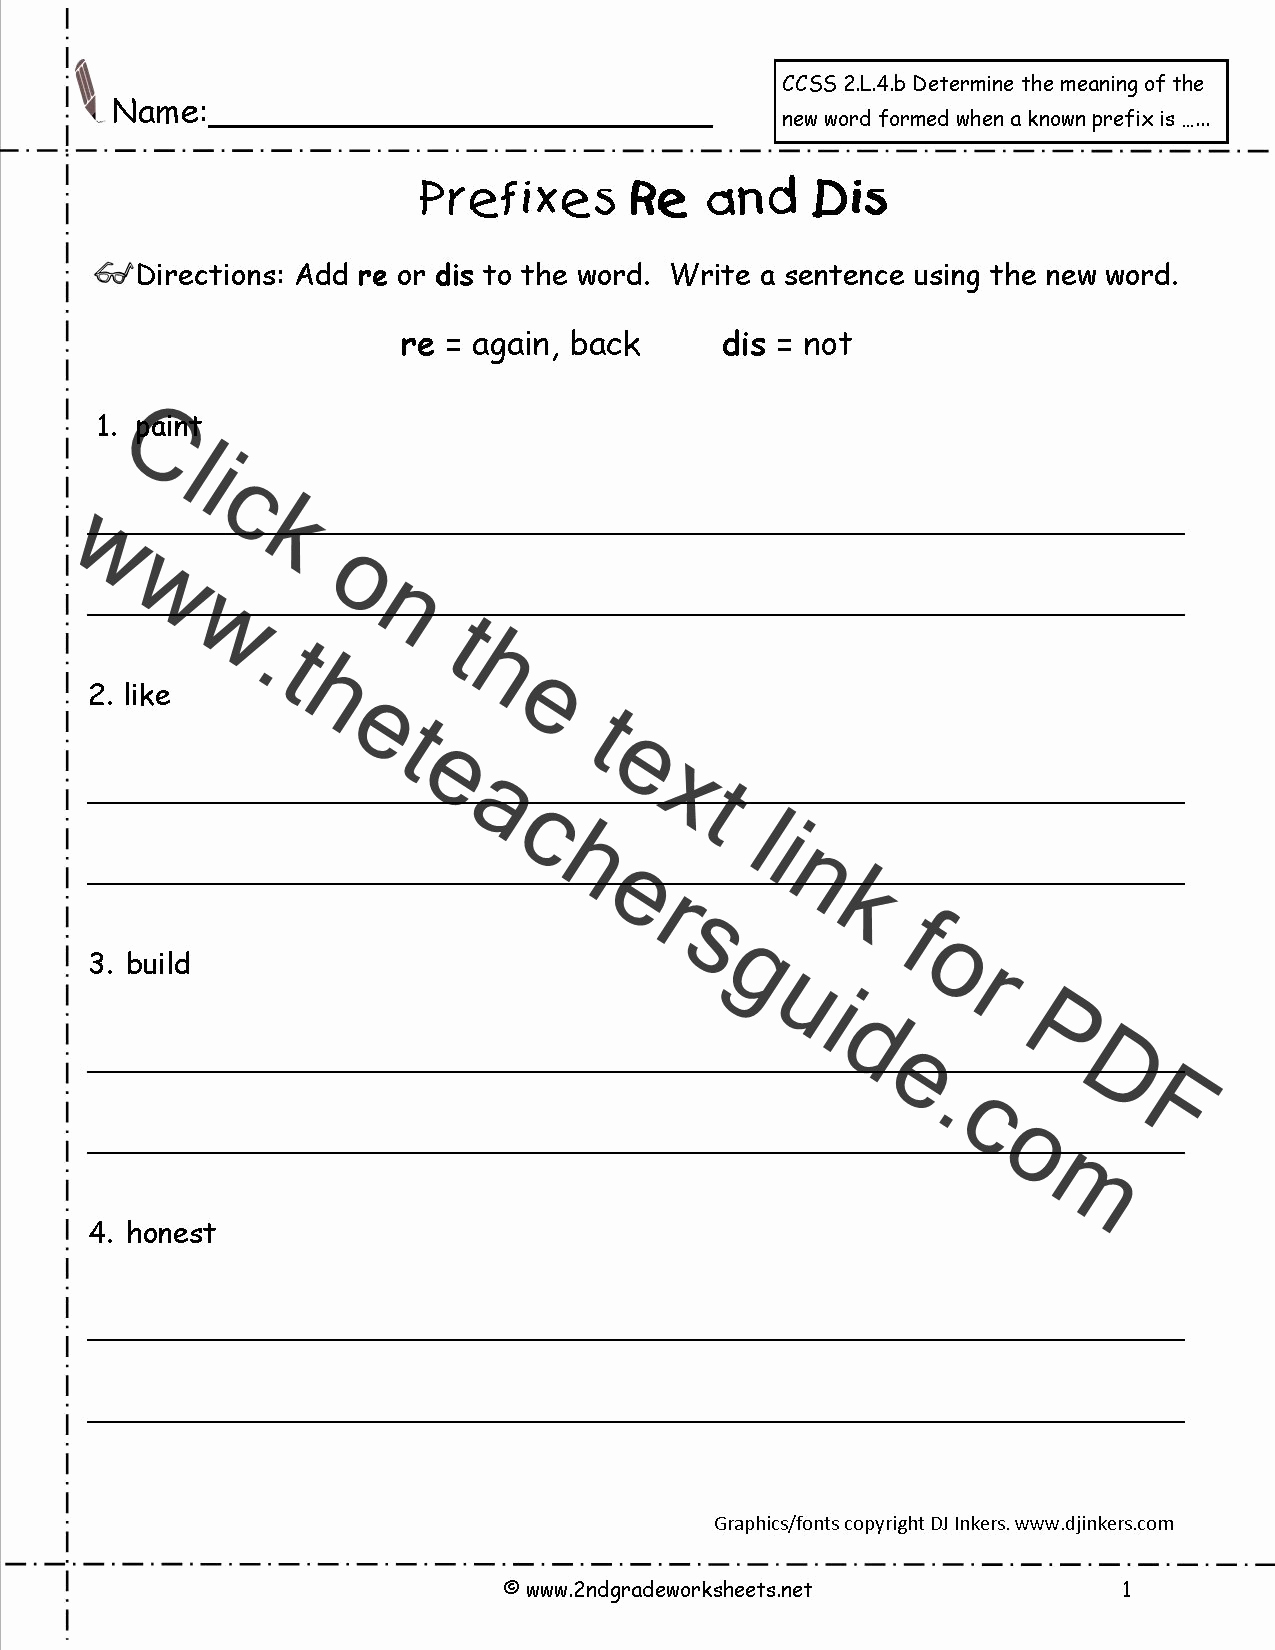 Suffix Worksheets for 4th Grade Elegant 20 Suffix Worksheets for 4th Grade